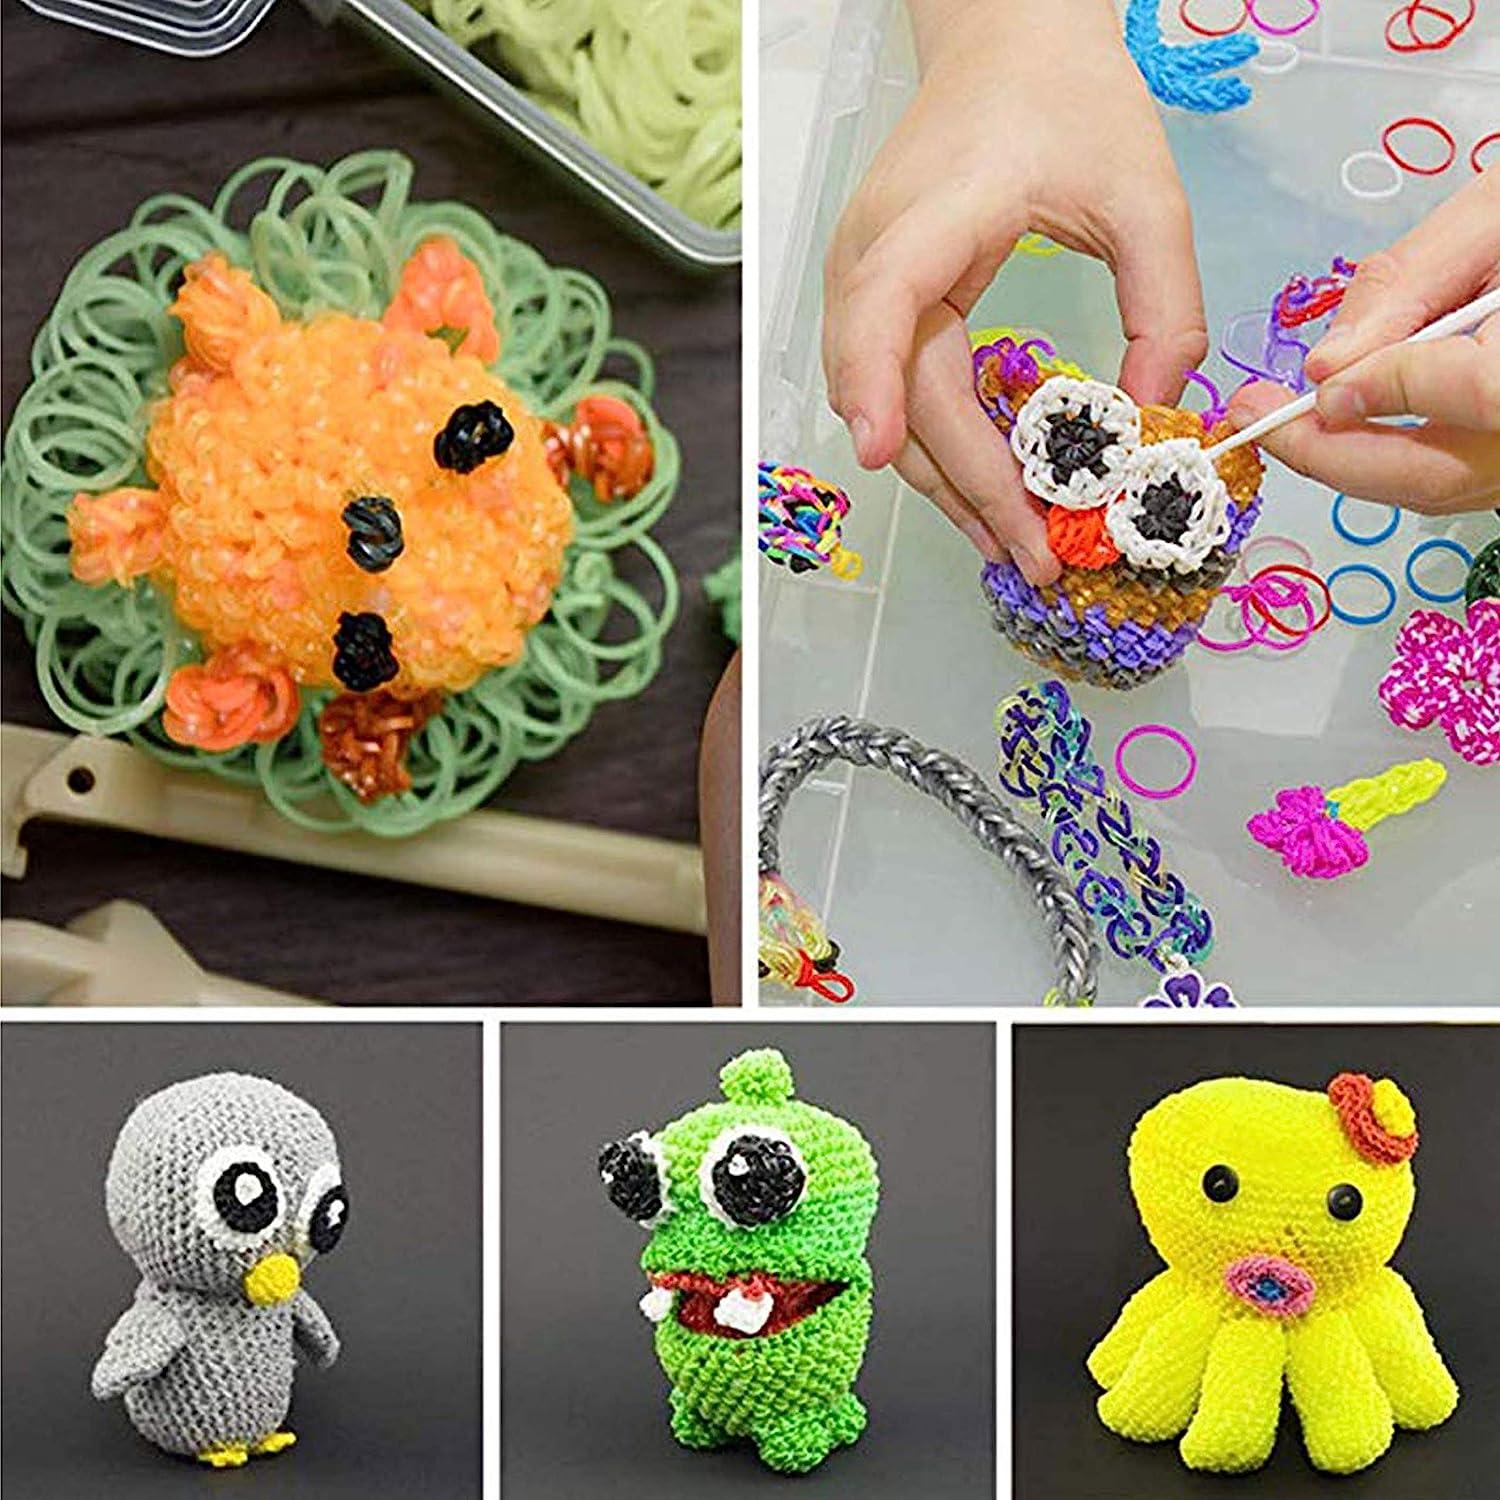 Spare Set For Children's Bracelets 352 Beads Rubber Loom Bands 600 Clips  Creative Diy 5 Looms And 40 Cartoon Pendants